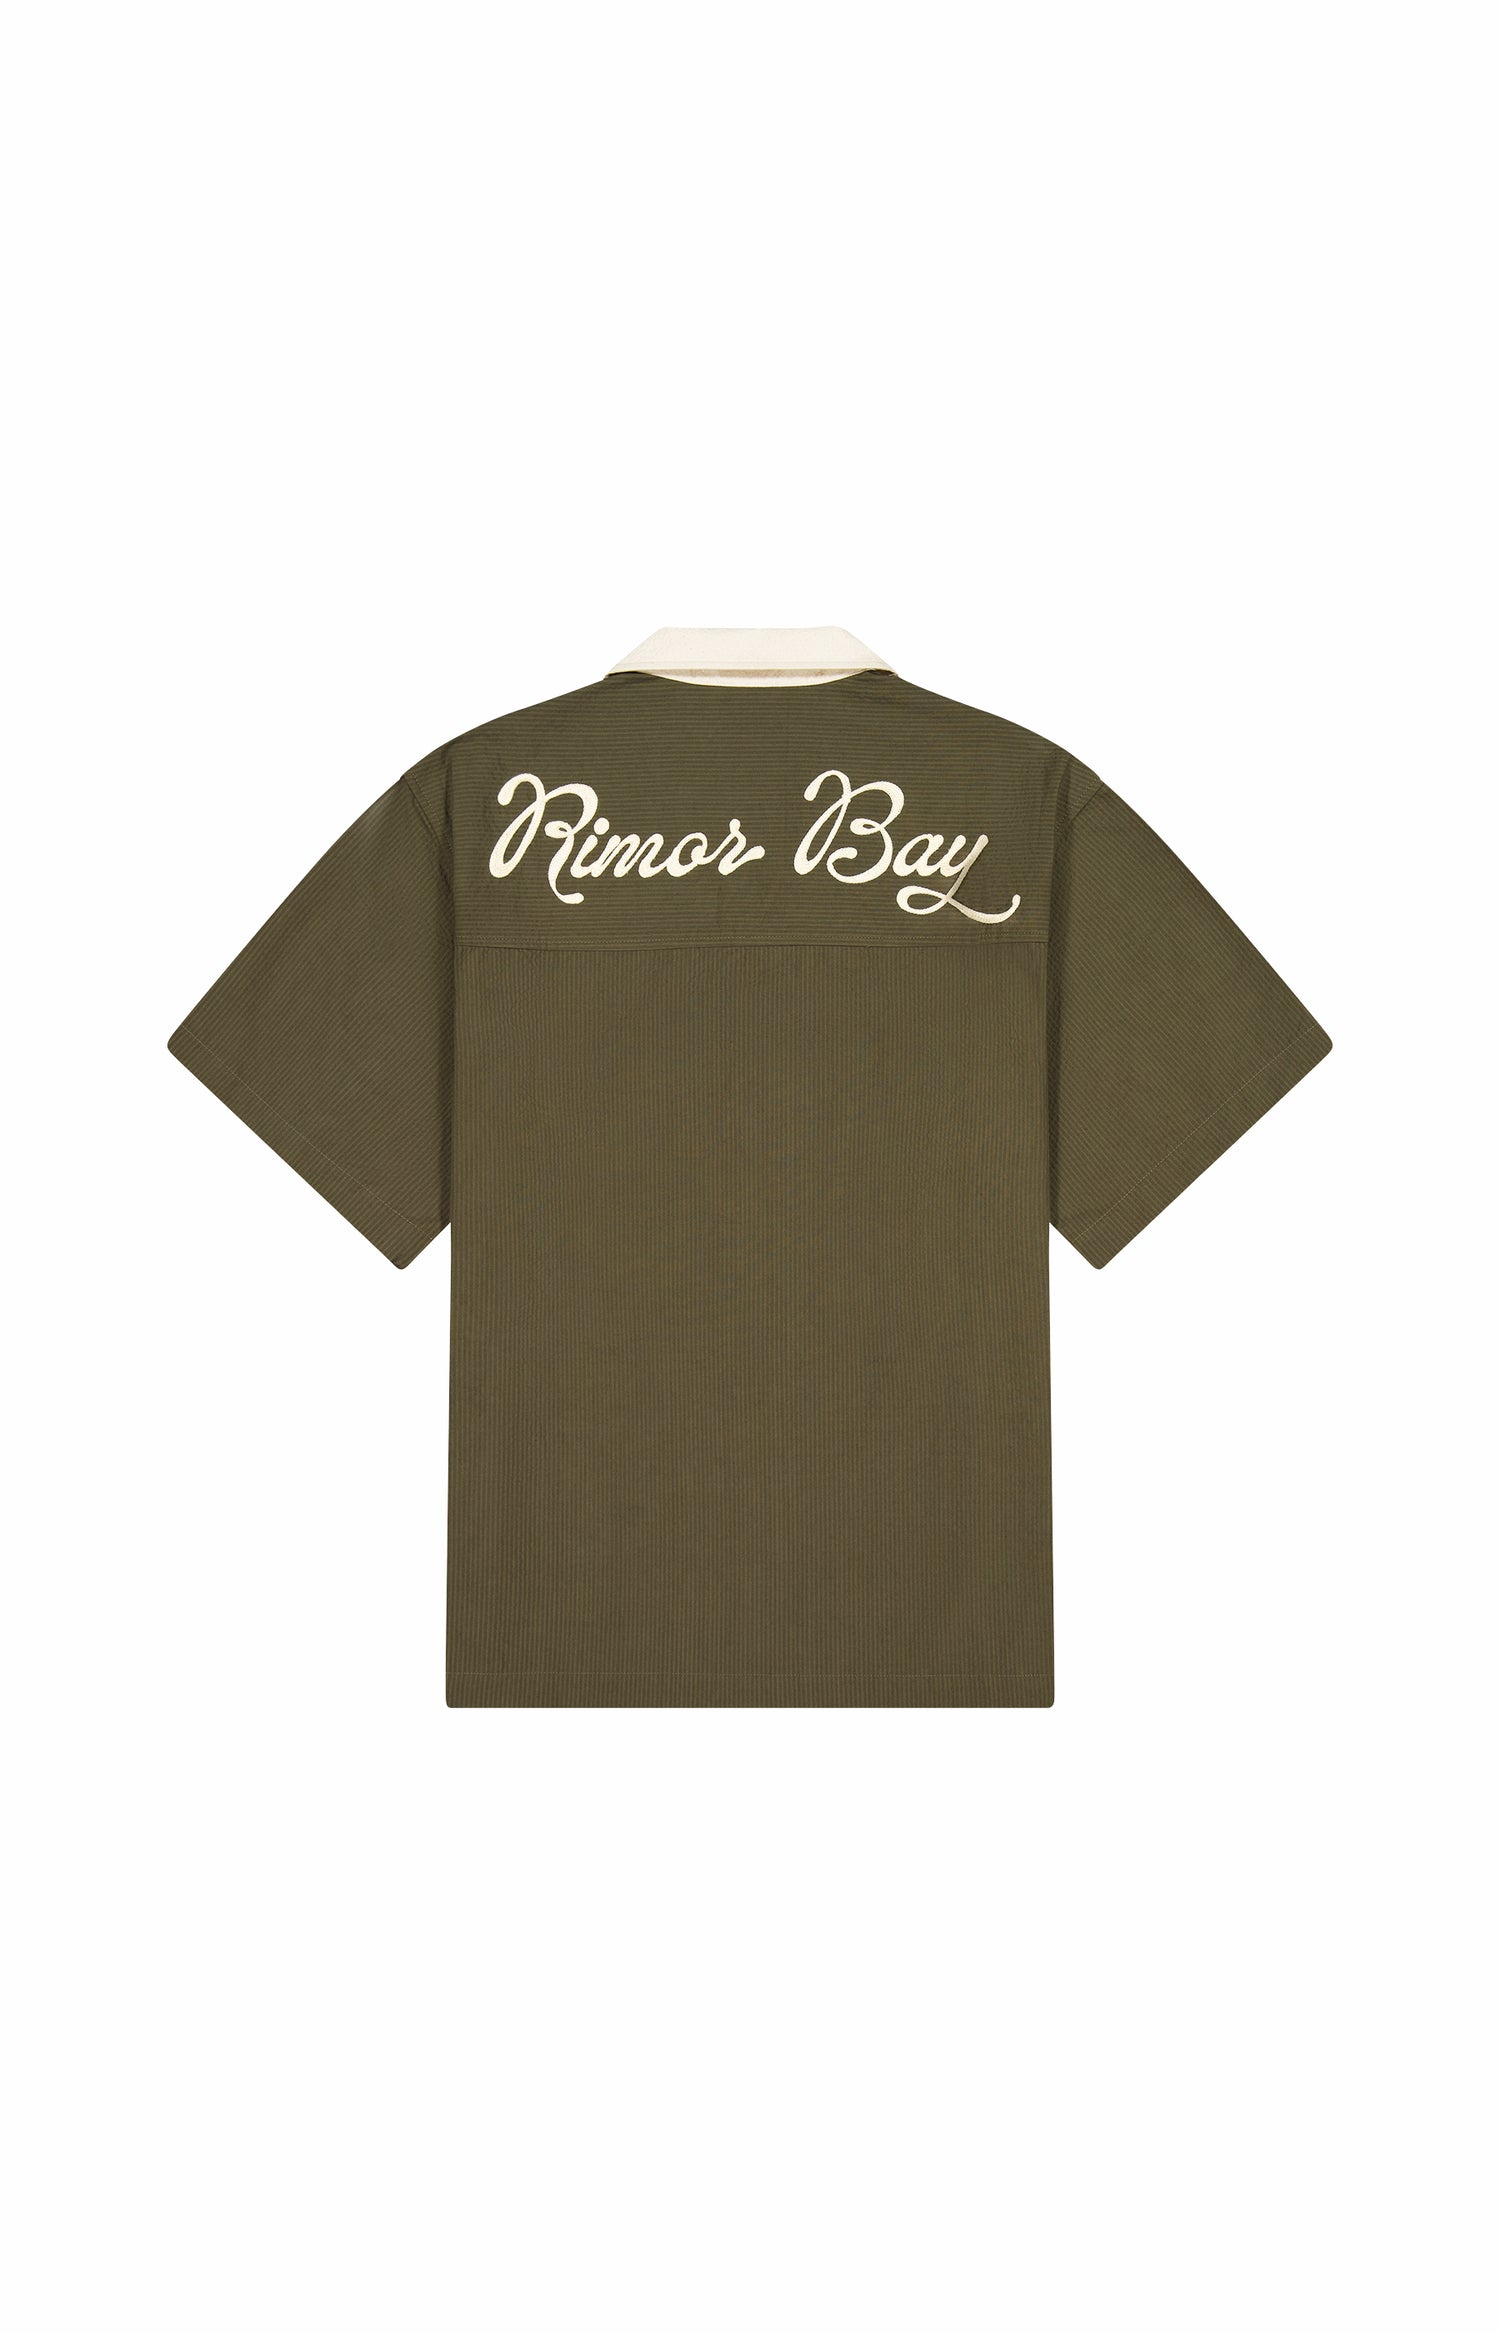 clearcut back of khaki and beige camp collar shirt with cursive logo 